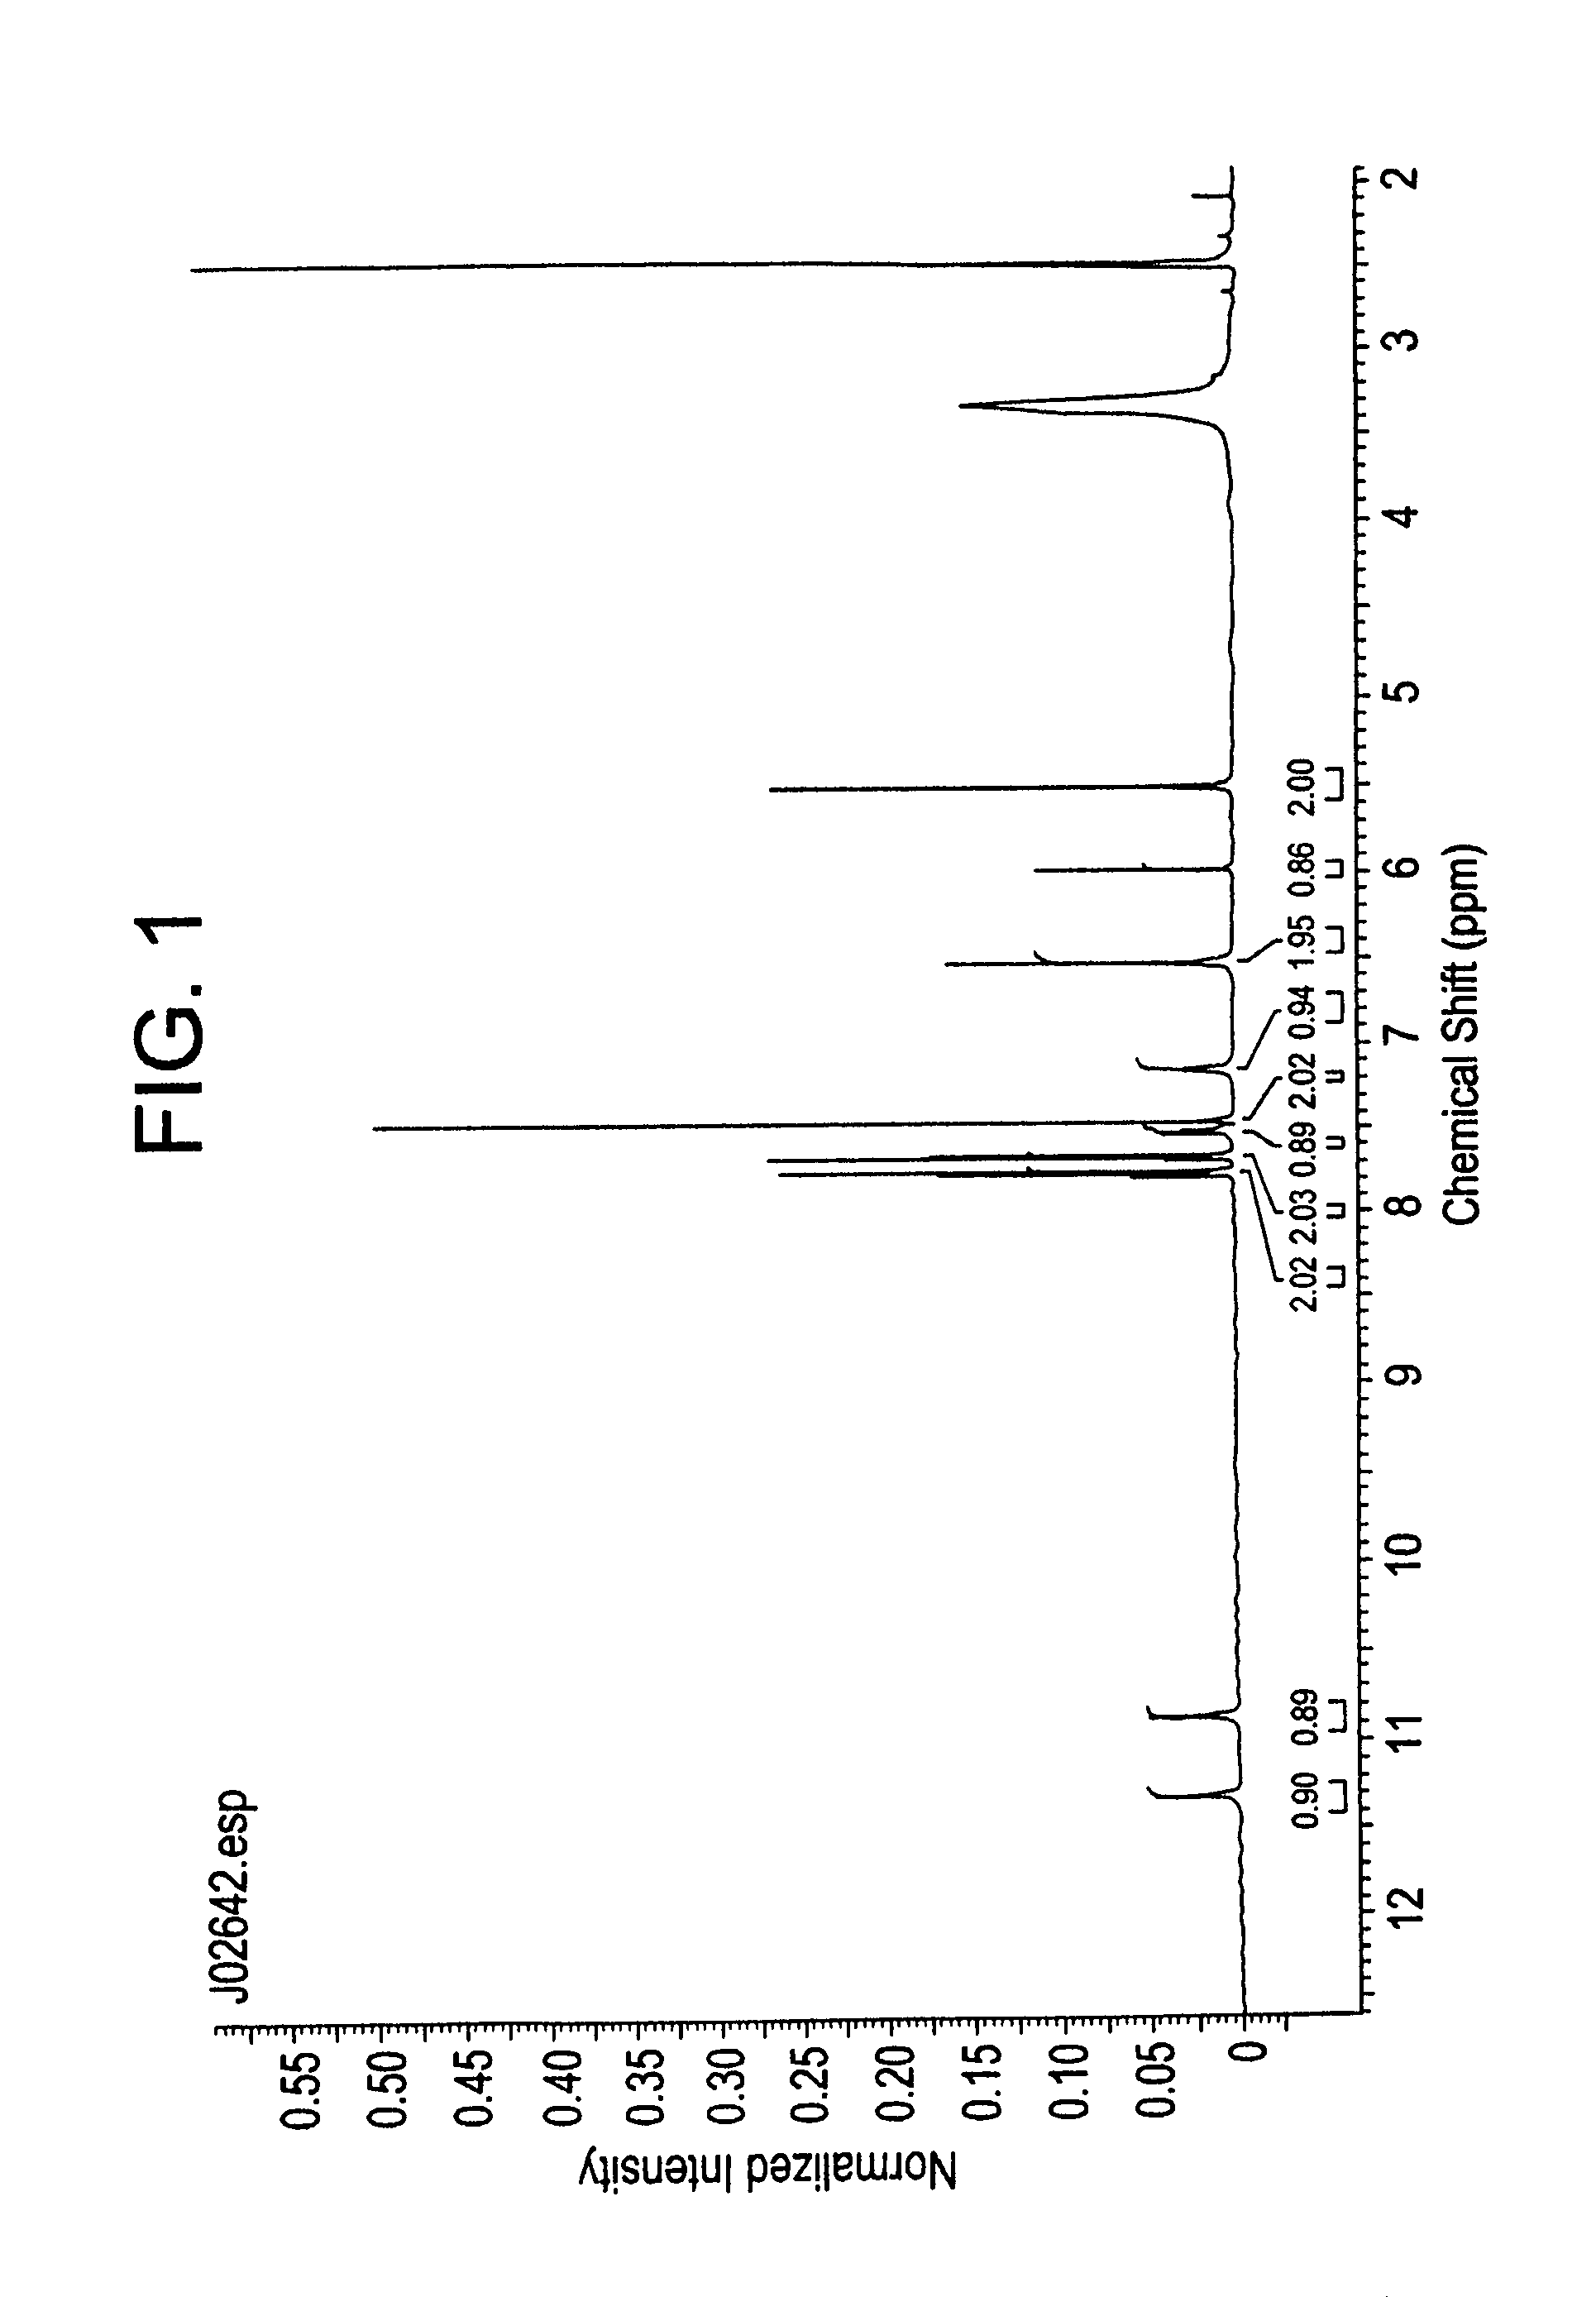 Compositions and processes for preparing 5-amino or substituted amino 1,2,3-triazoles and triazole orotate formulations